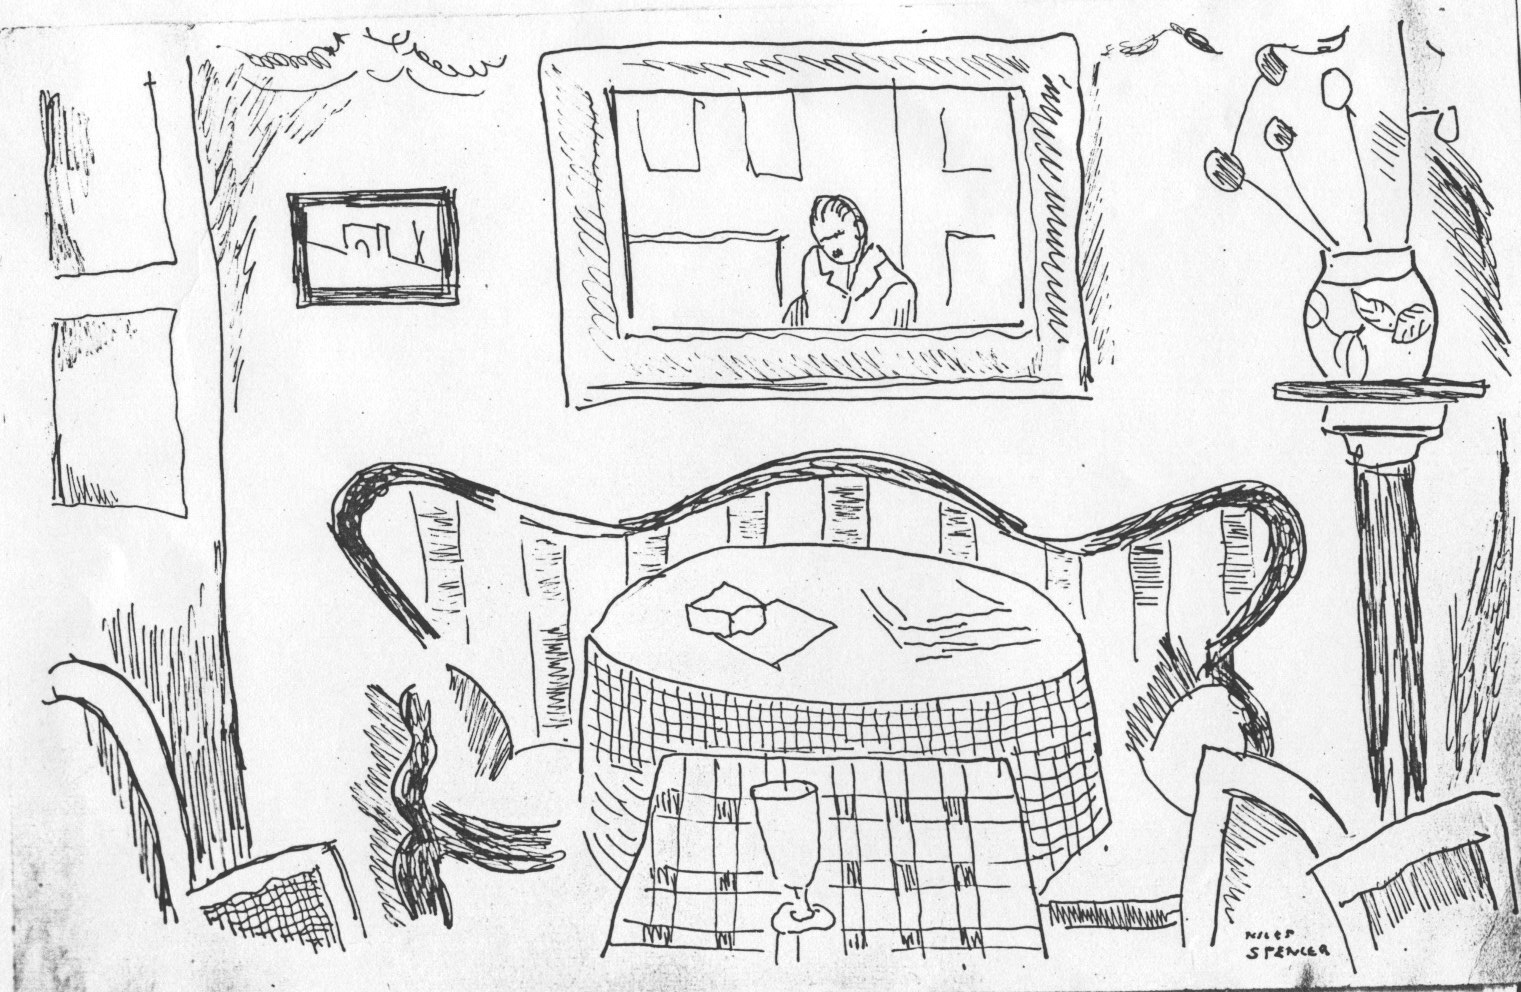 Ink drawing of room with couch, round table, square table, glass, vase, chairs, and mirror with reflection of the artist